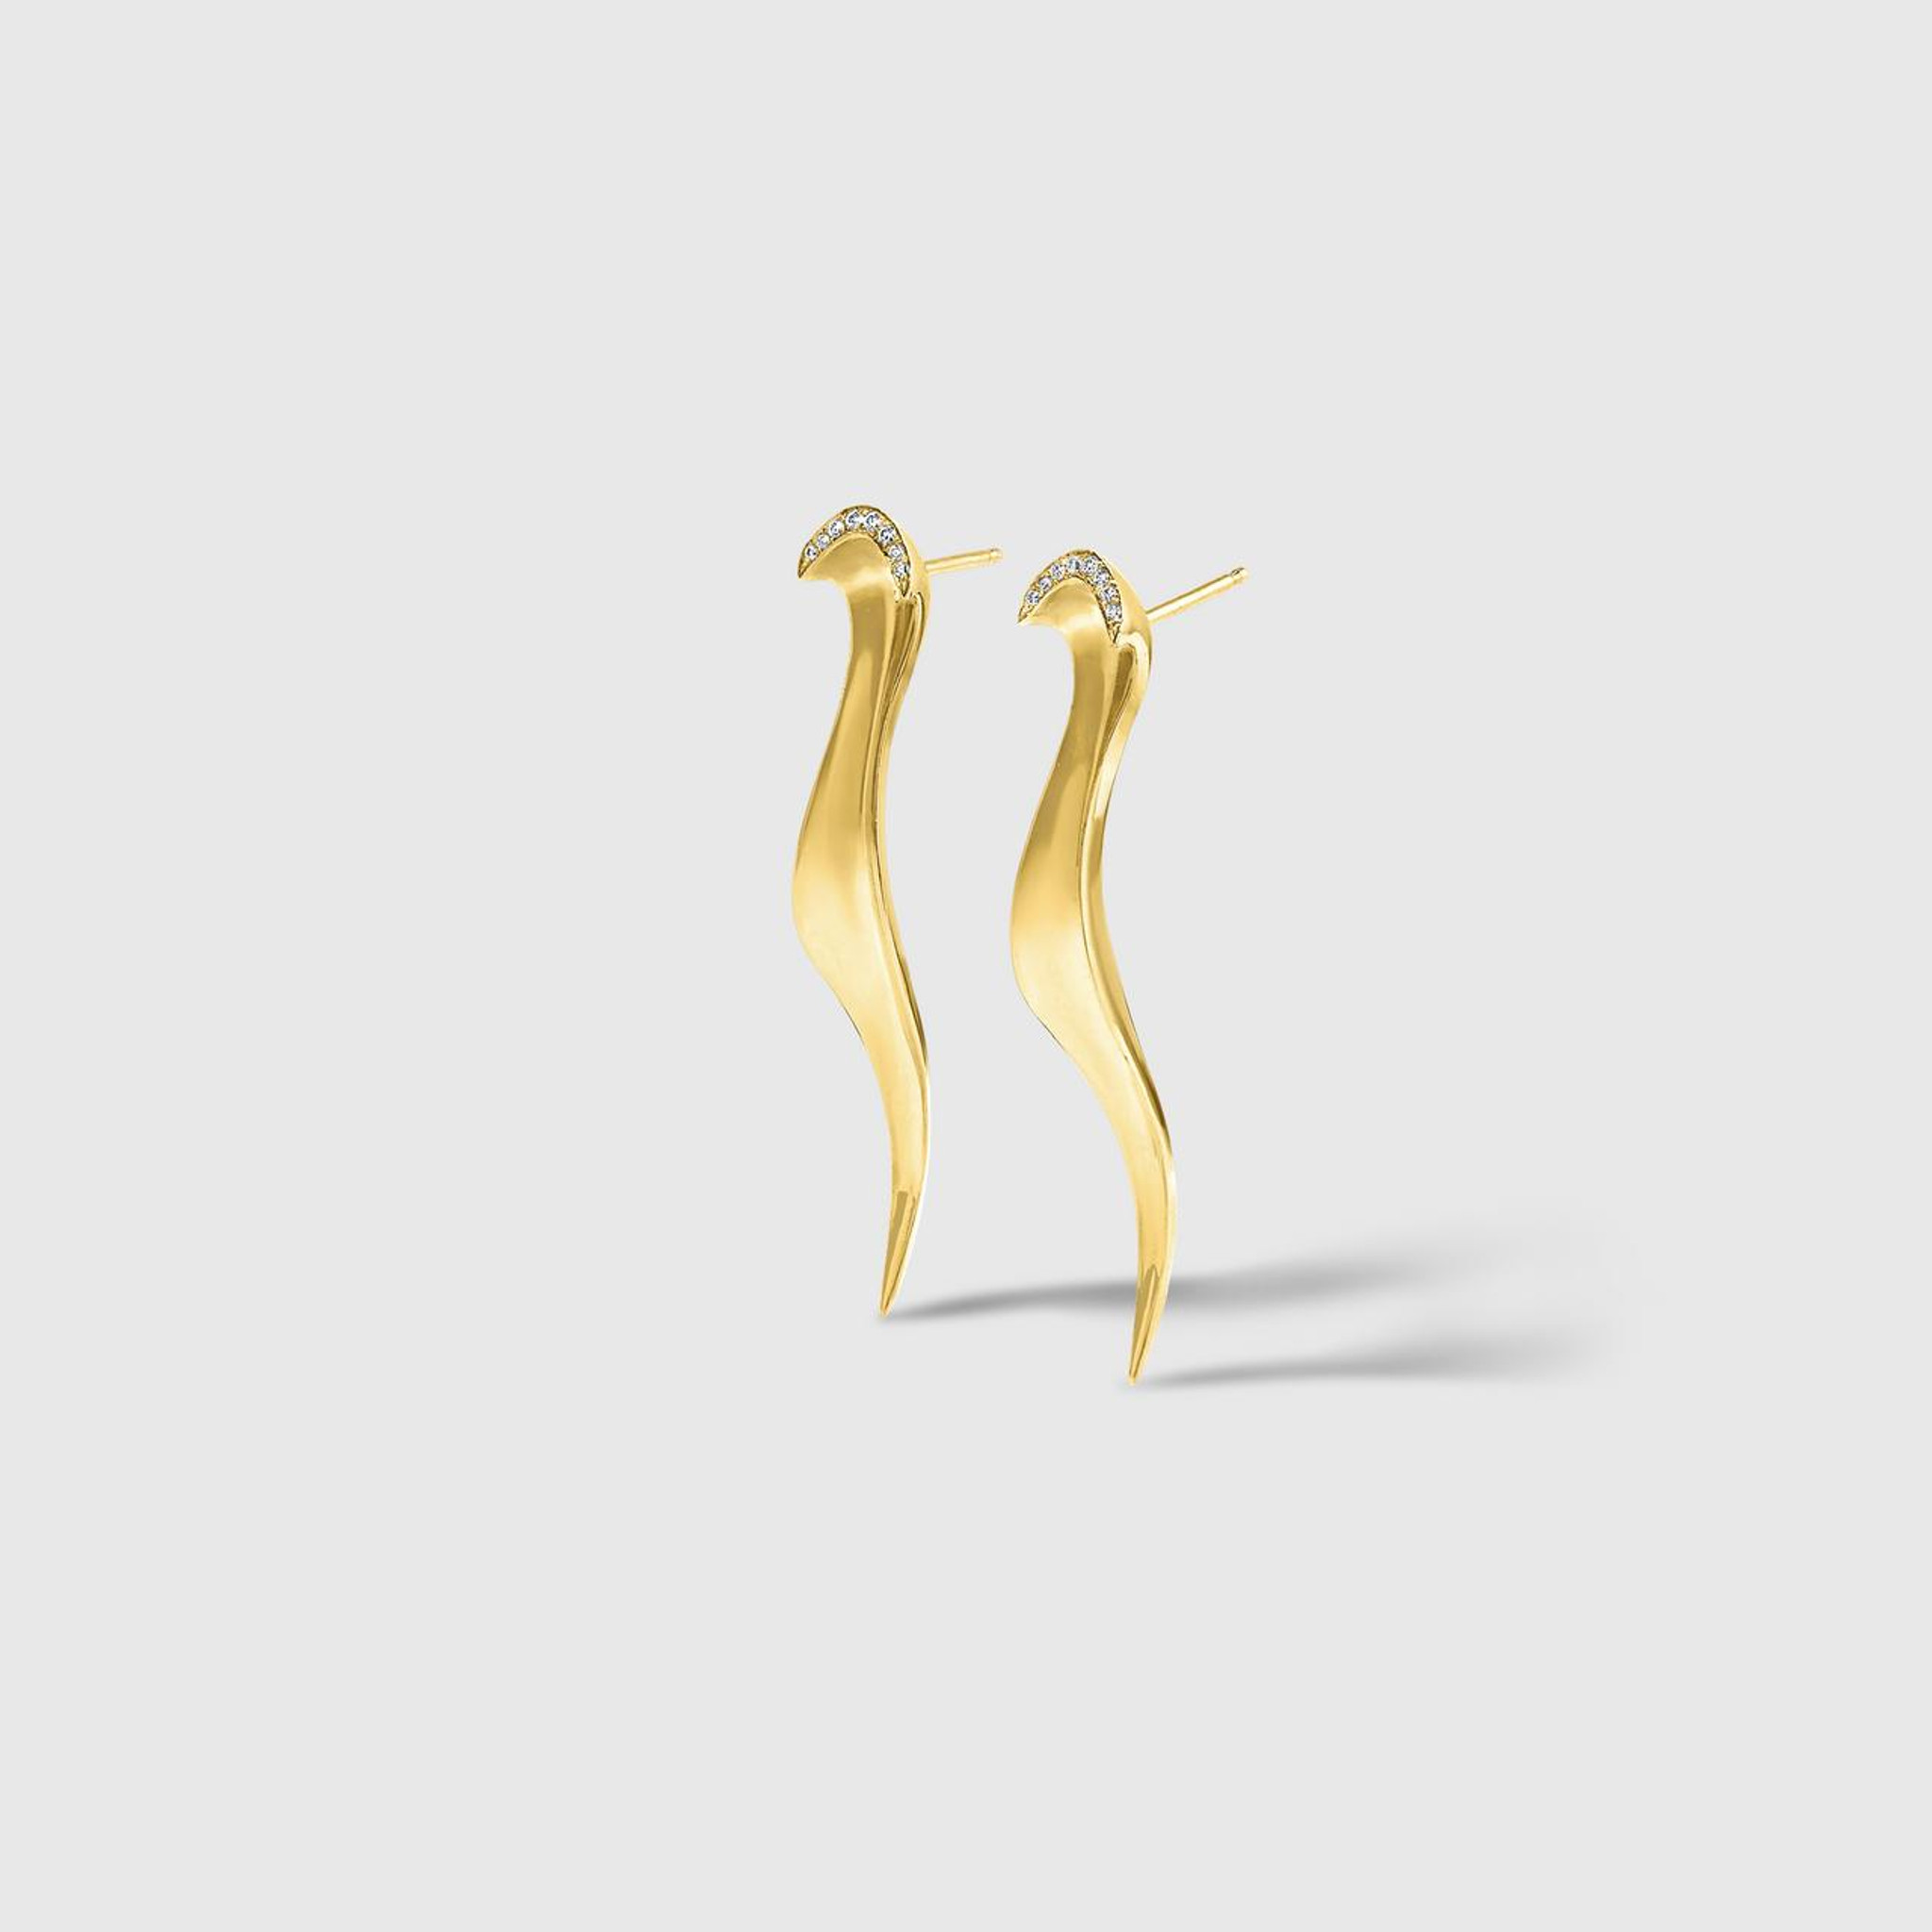 Couture "Persephone" Earrings, 18K yellow gold, contemporary, sculptural earrings by Ashley Childs. 18K Yellow Gold, 1.75” in length. 18Kt yellow gold posts and backs. 0.08 carats of graduated pavé diamonds. Perfect for day or night.